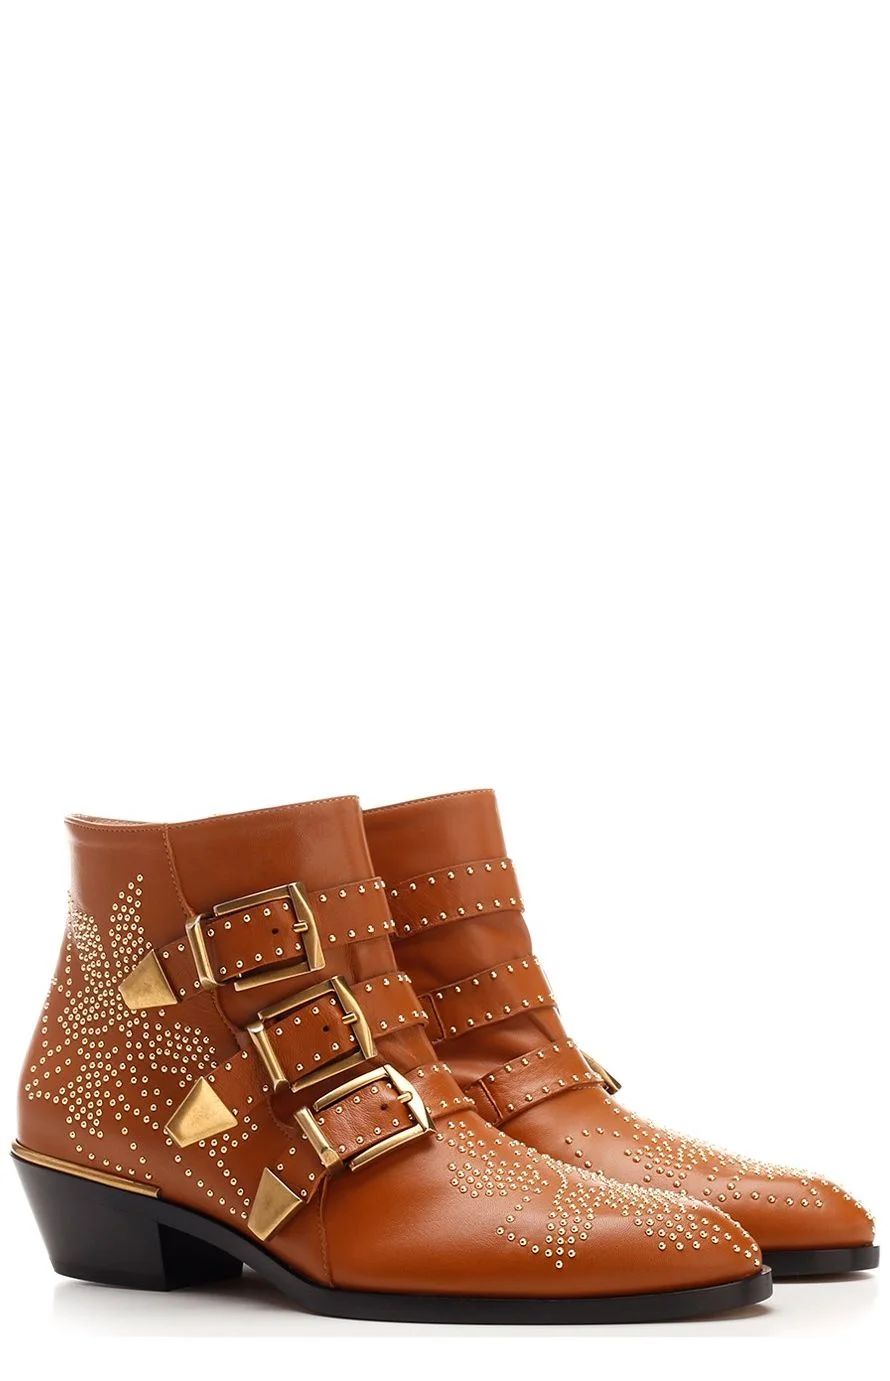 Chloé Susanna Embellished Boots | Cettire Global